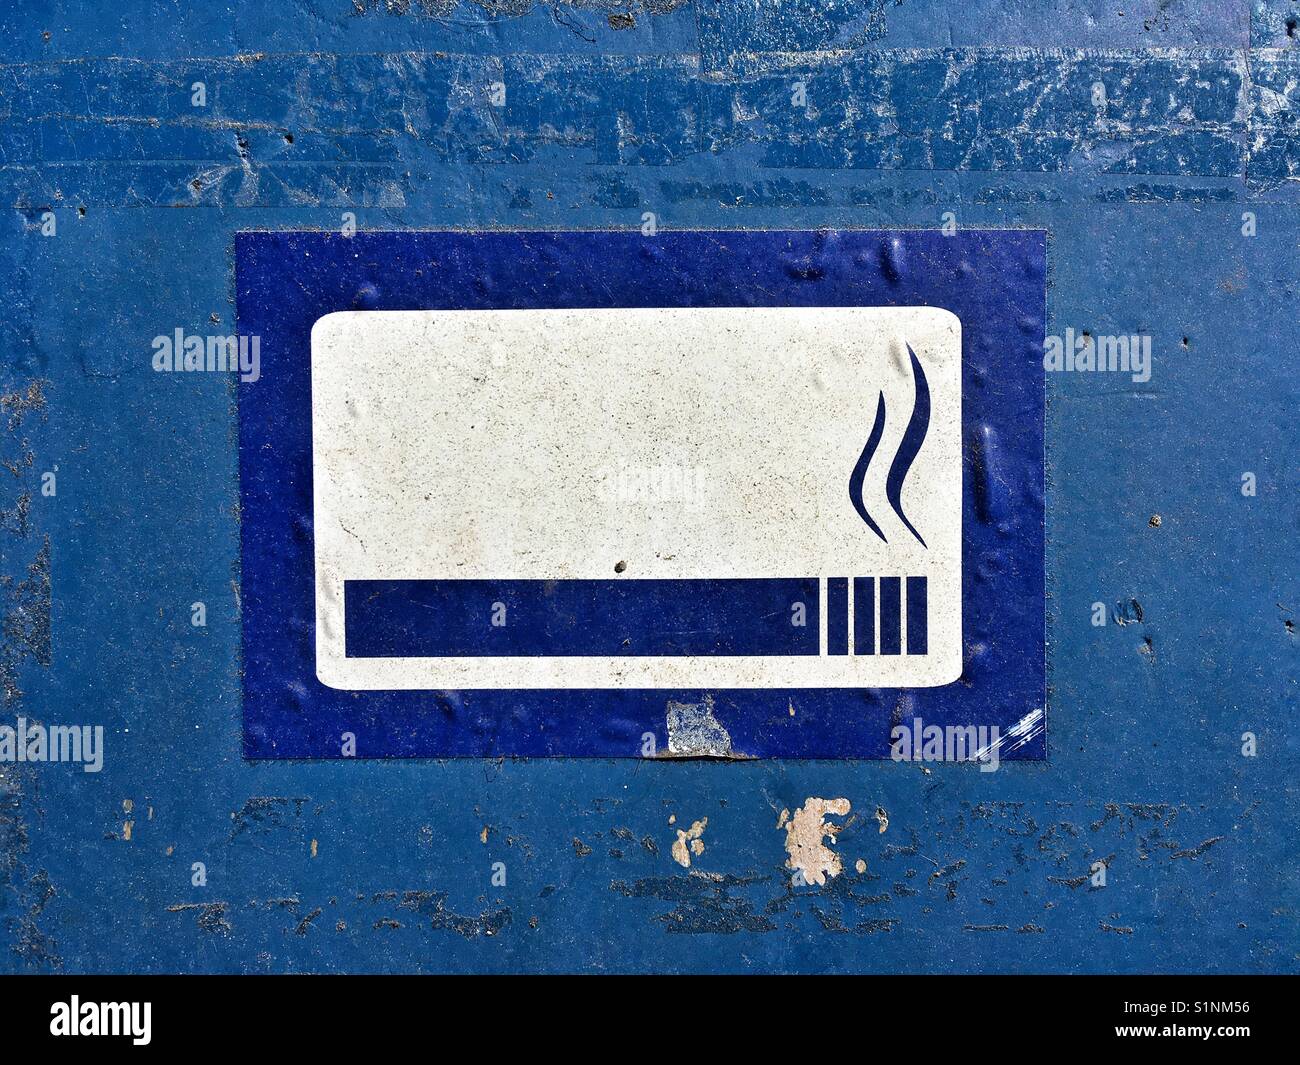 Smoking permitted sign Stock Photo